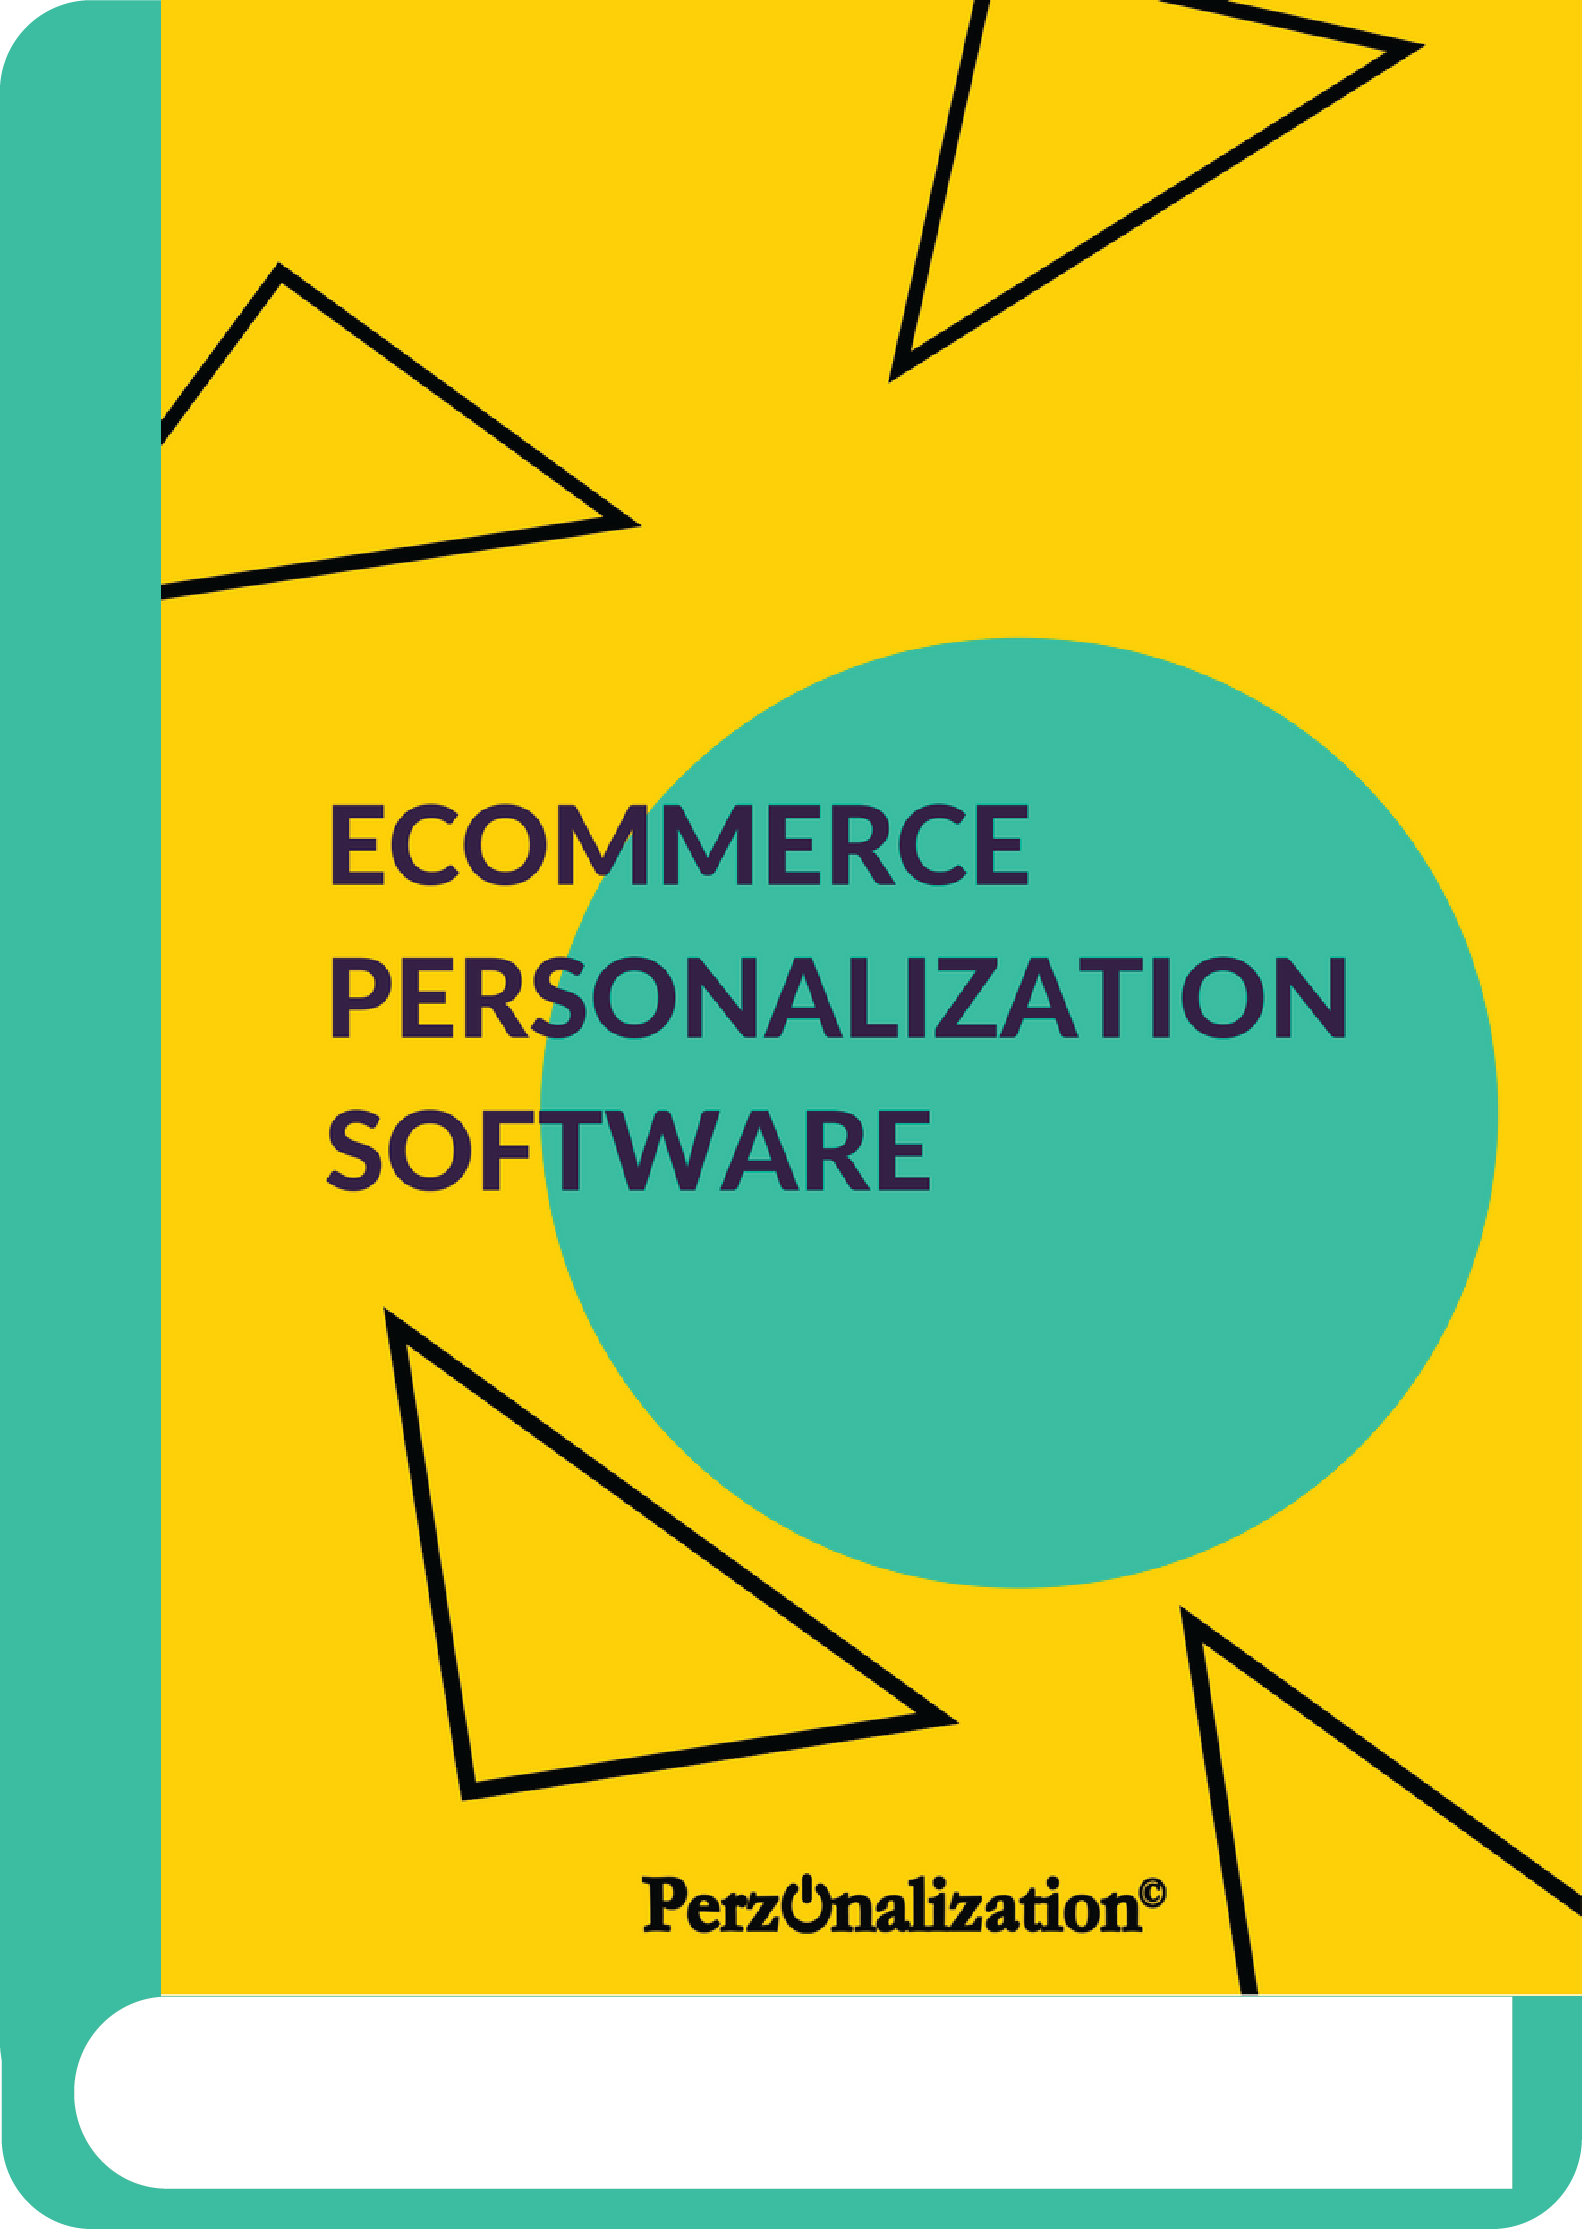 E-Commerce personalization software is a tool that is developed explicitly to personalize E-Commerce websites. This eBook explains what a personalization software is, the evolution, current implications, the need in E-Commerce and how to select a vendor for personalization needs.